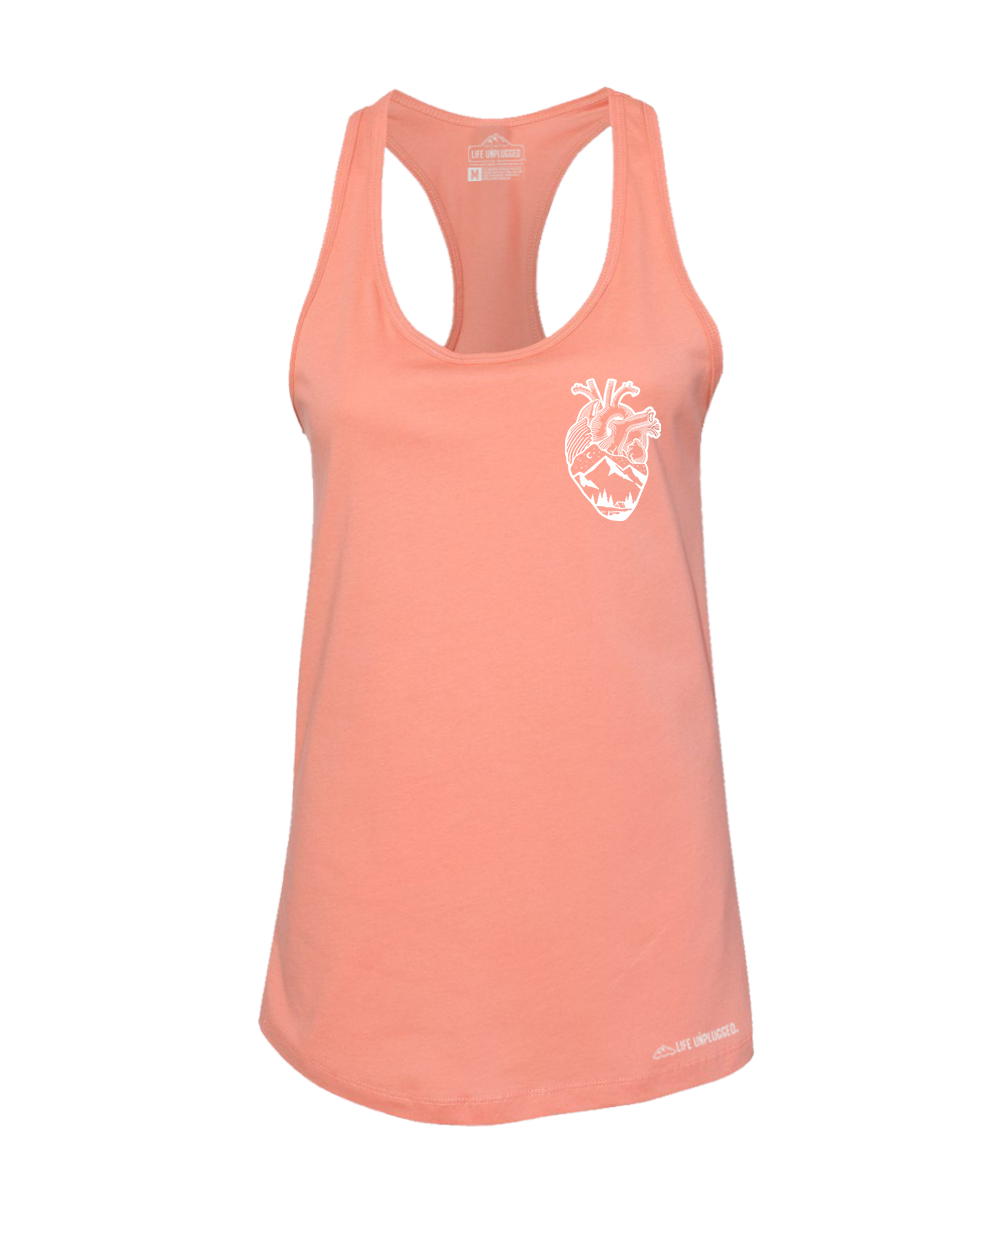 Anatomical Heart (Left Chest) Premium Women's Relaxed Fit Racerback Tank Top - Life Unplugged